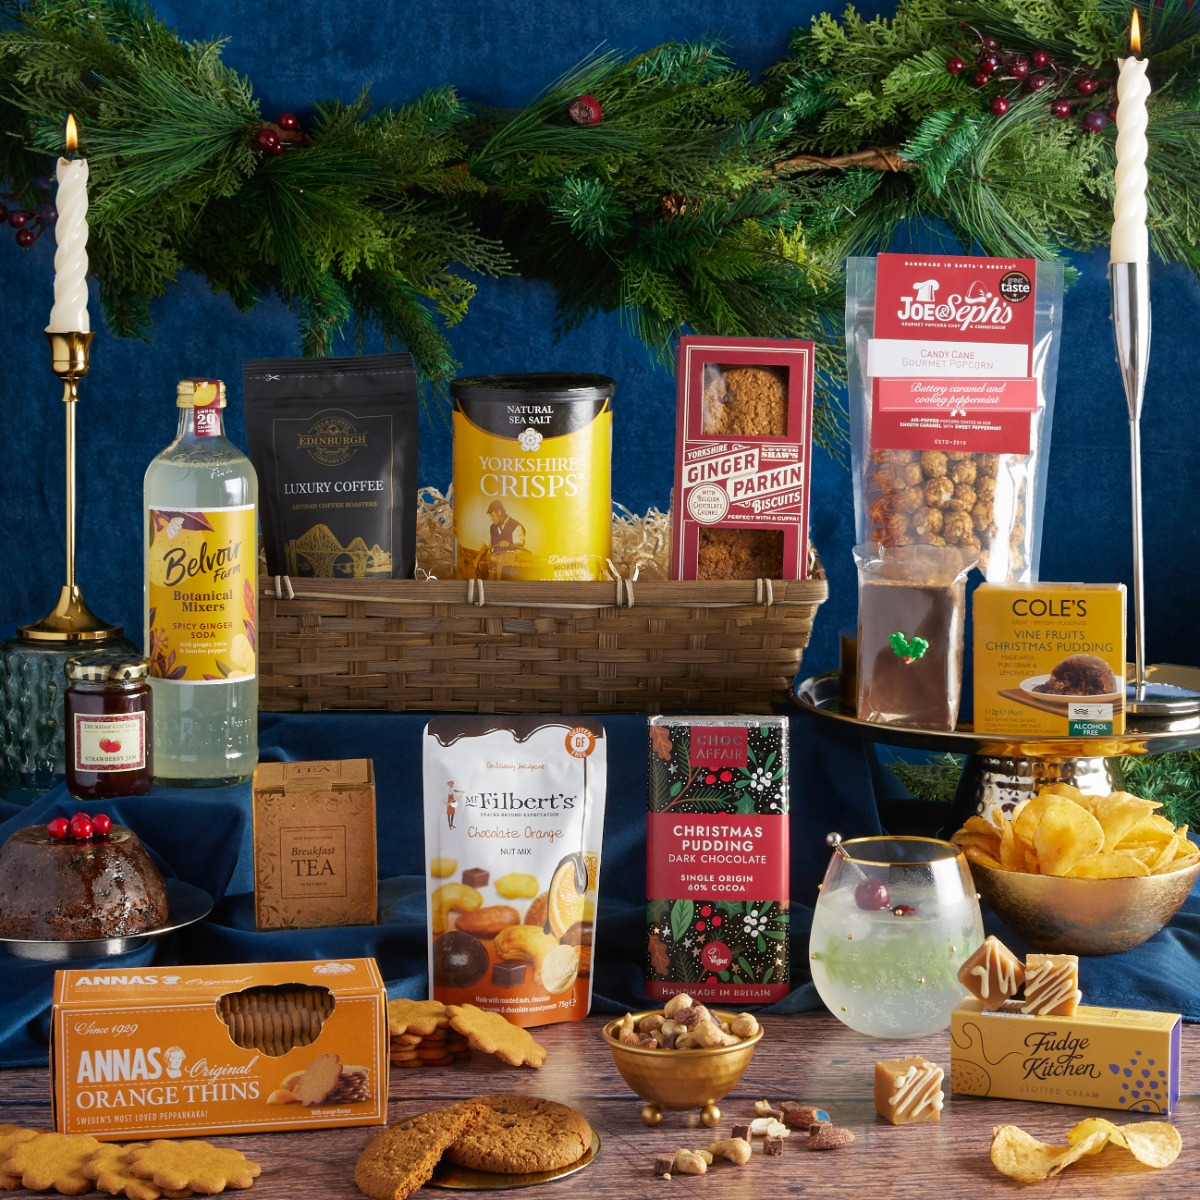 The Luxury Joy of Christmas Hamper with contents on display as one of our Christmas hampers ideas